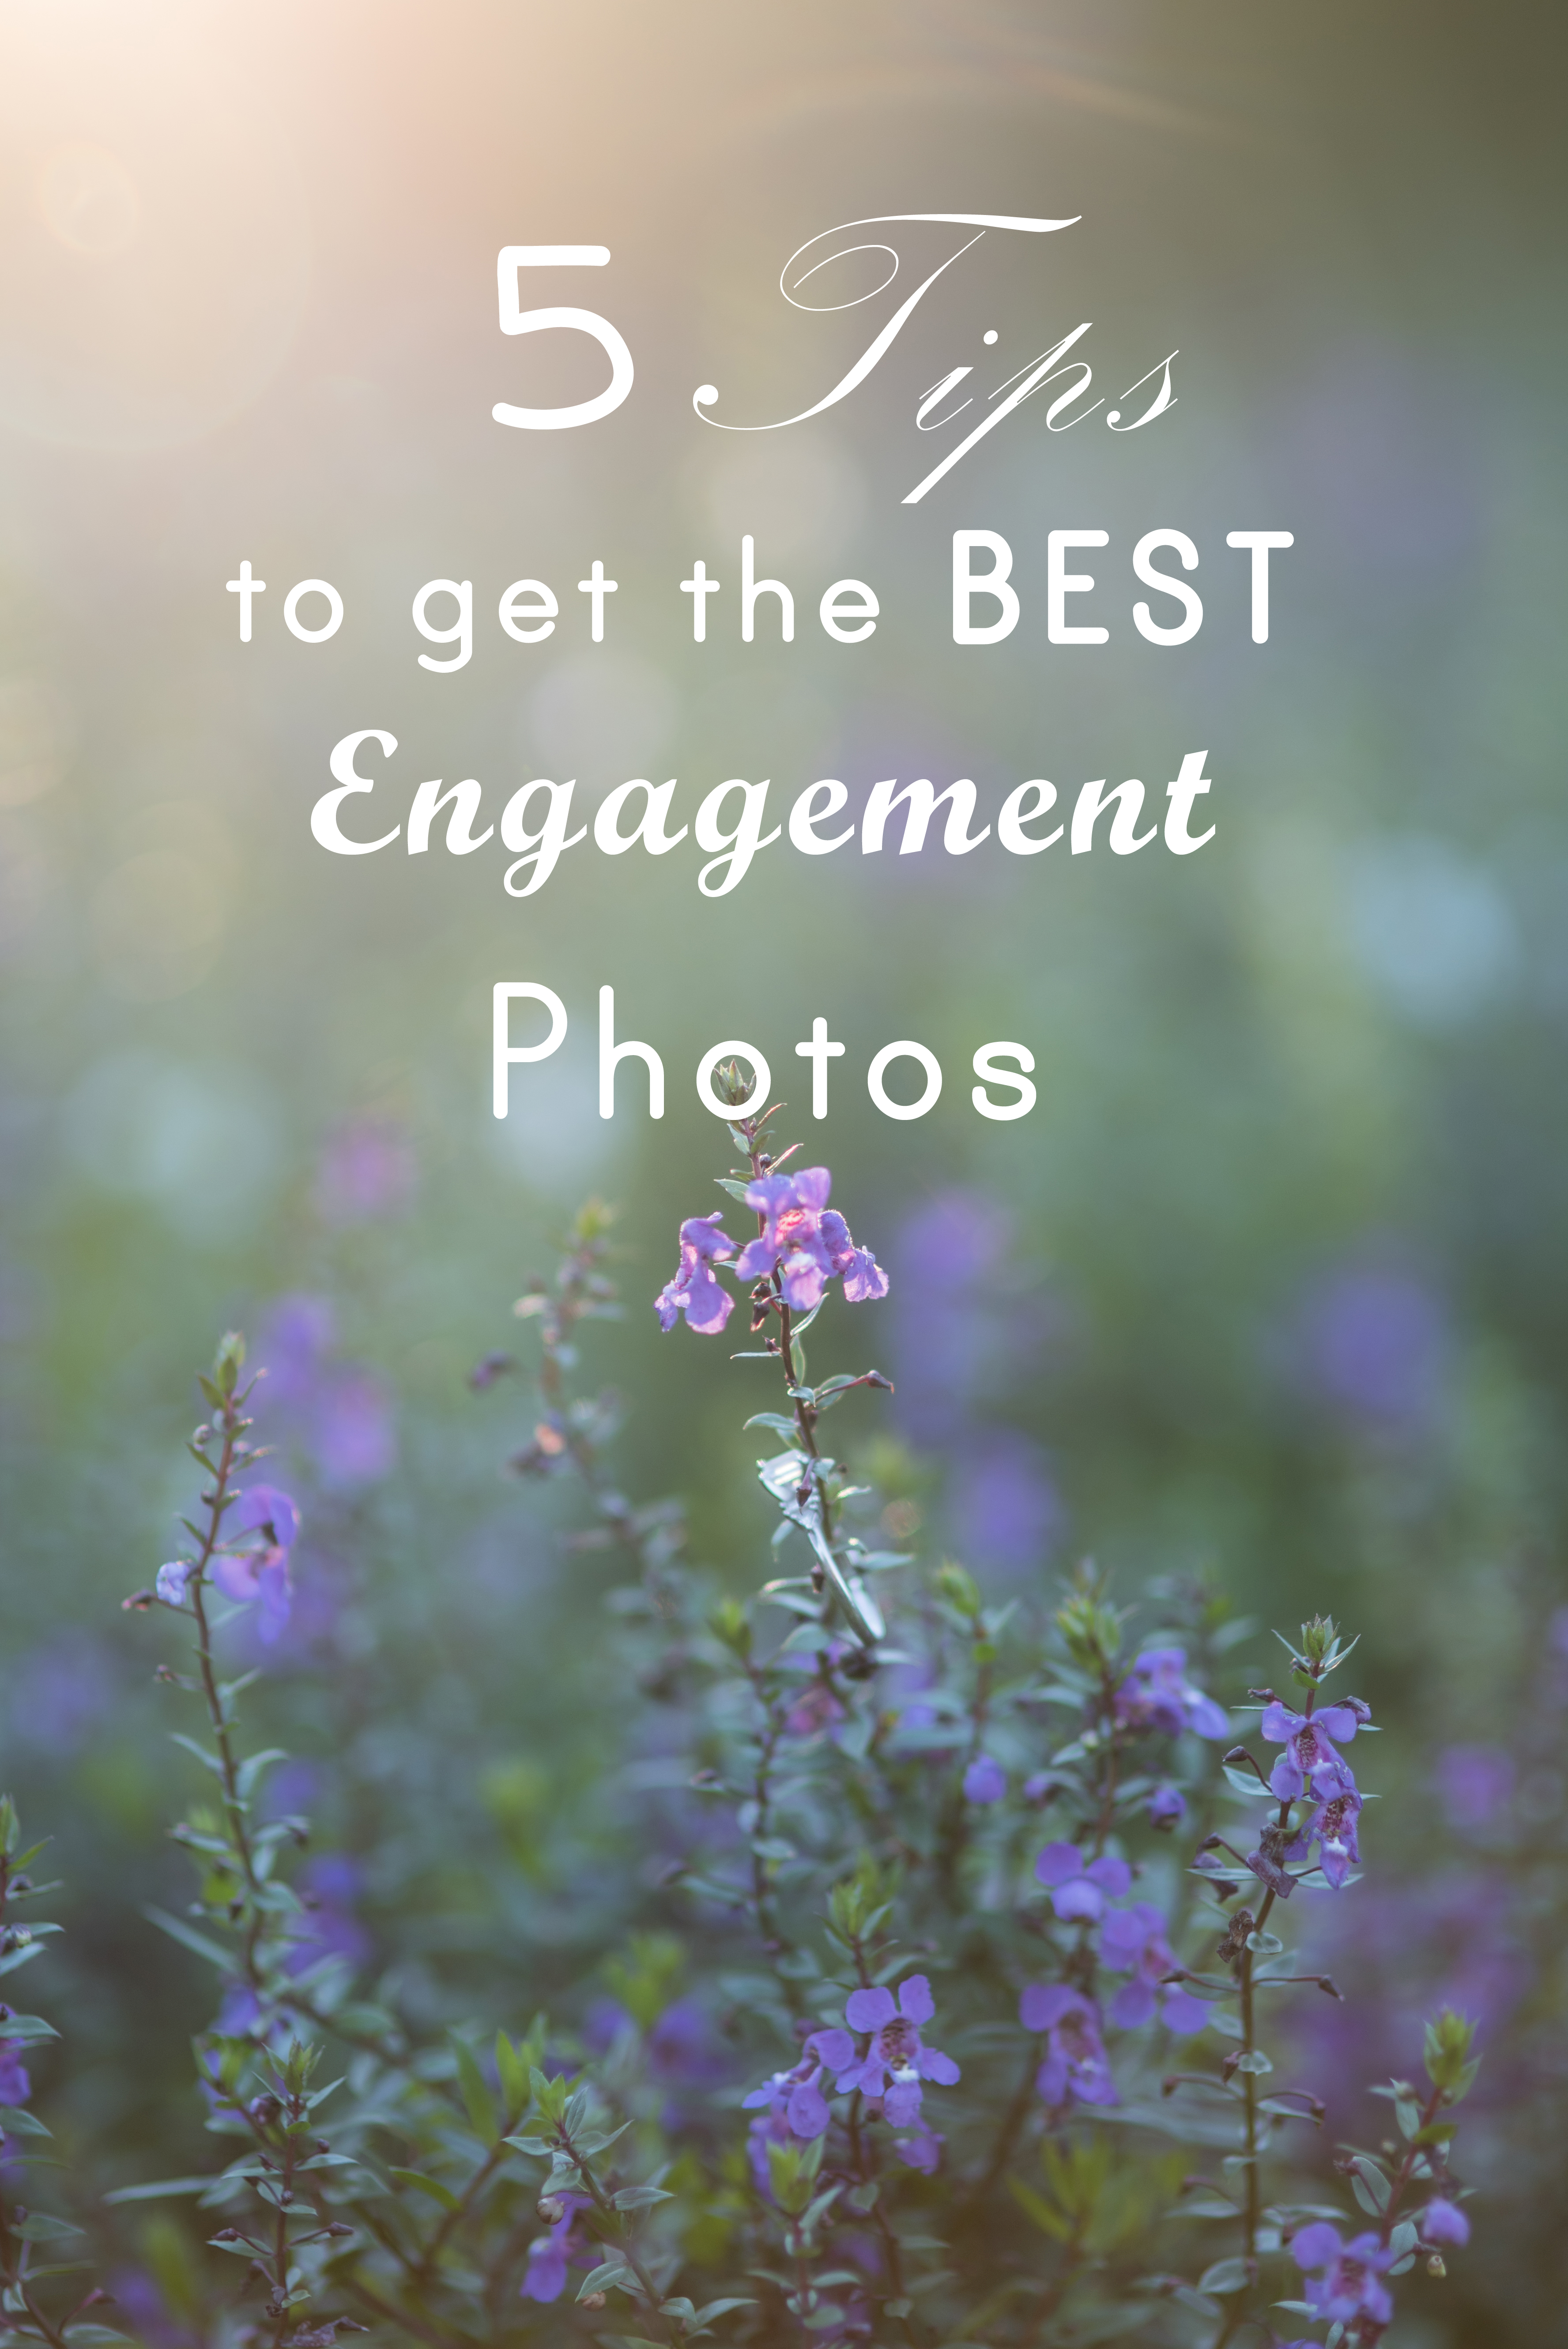 5 tips for engagement photos